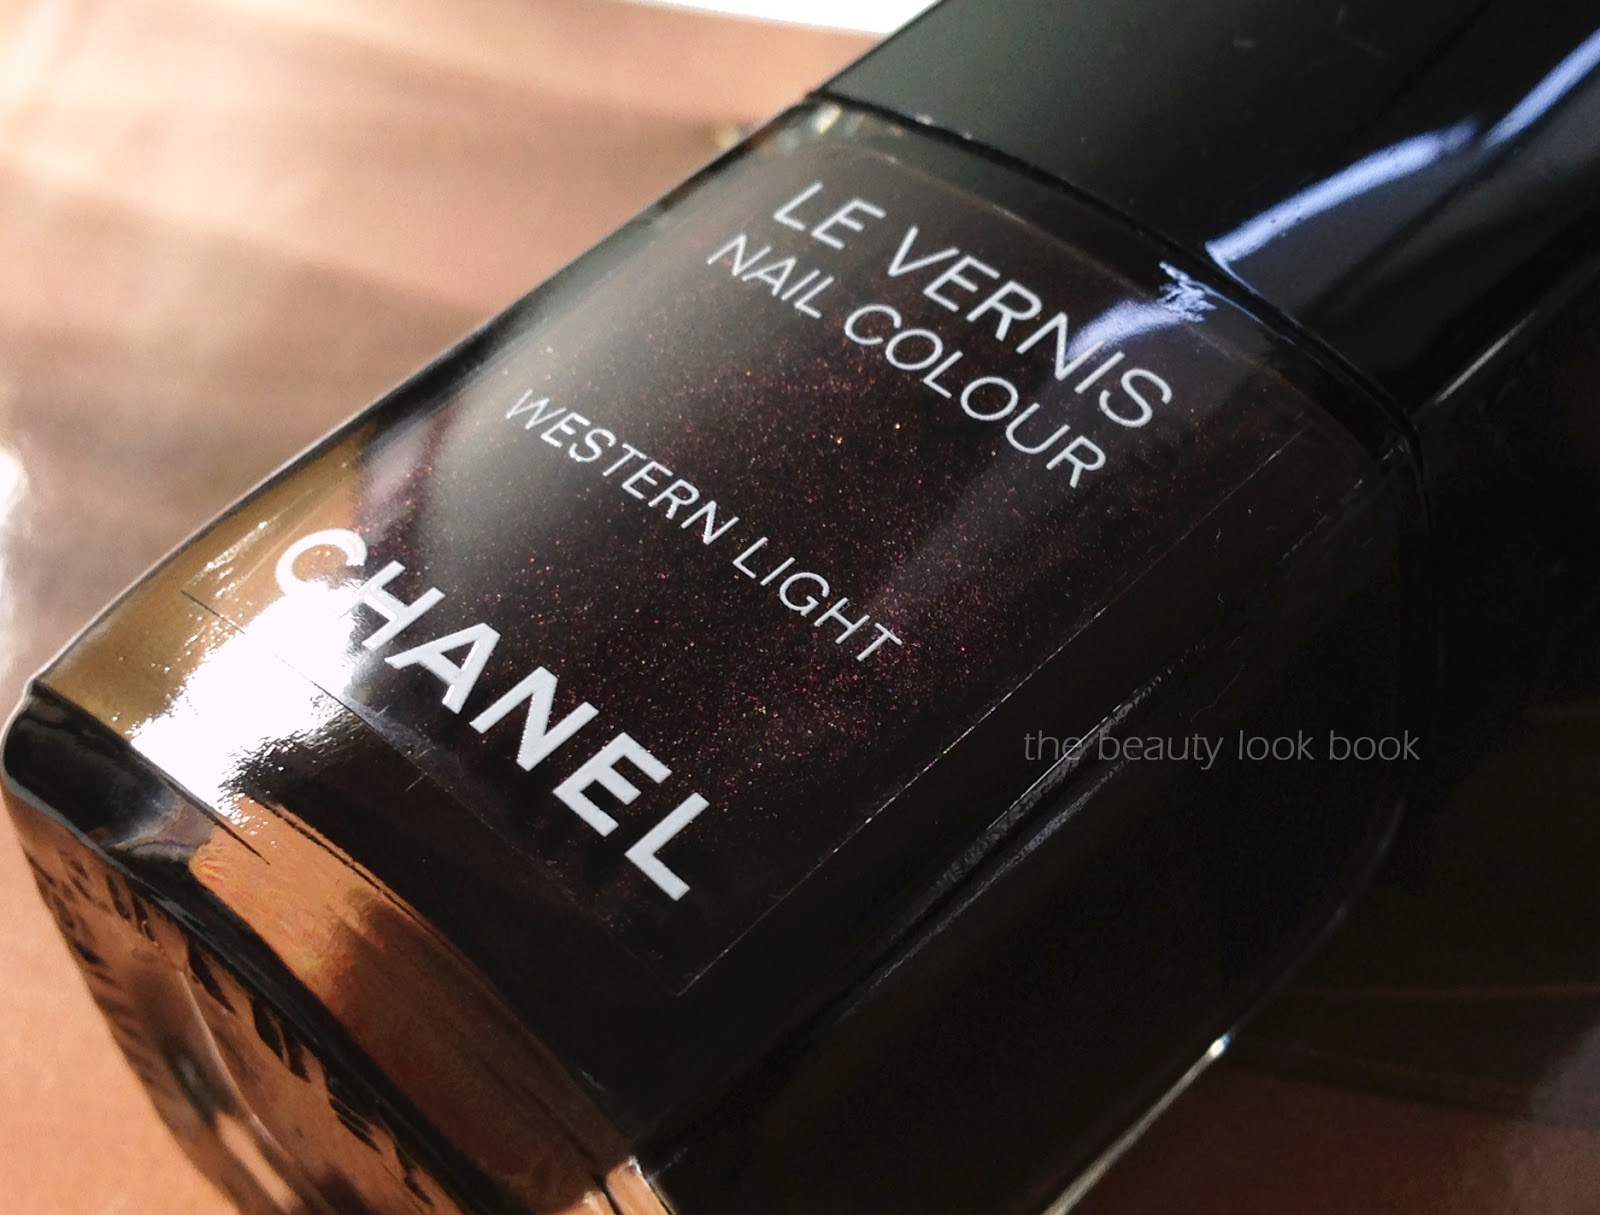 Chanel Archives - Page 47 of 84 - The Beauty Look Book